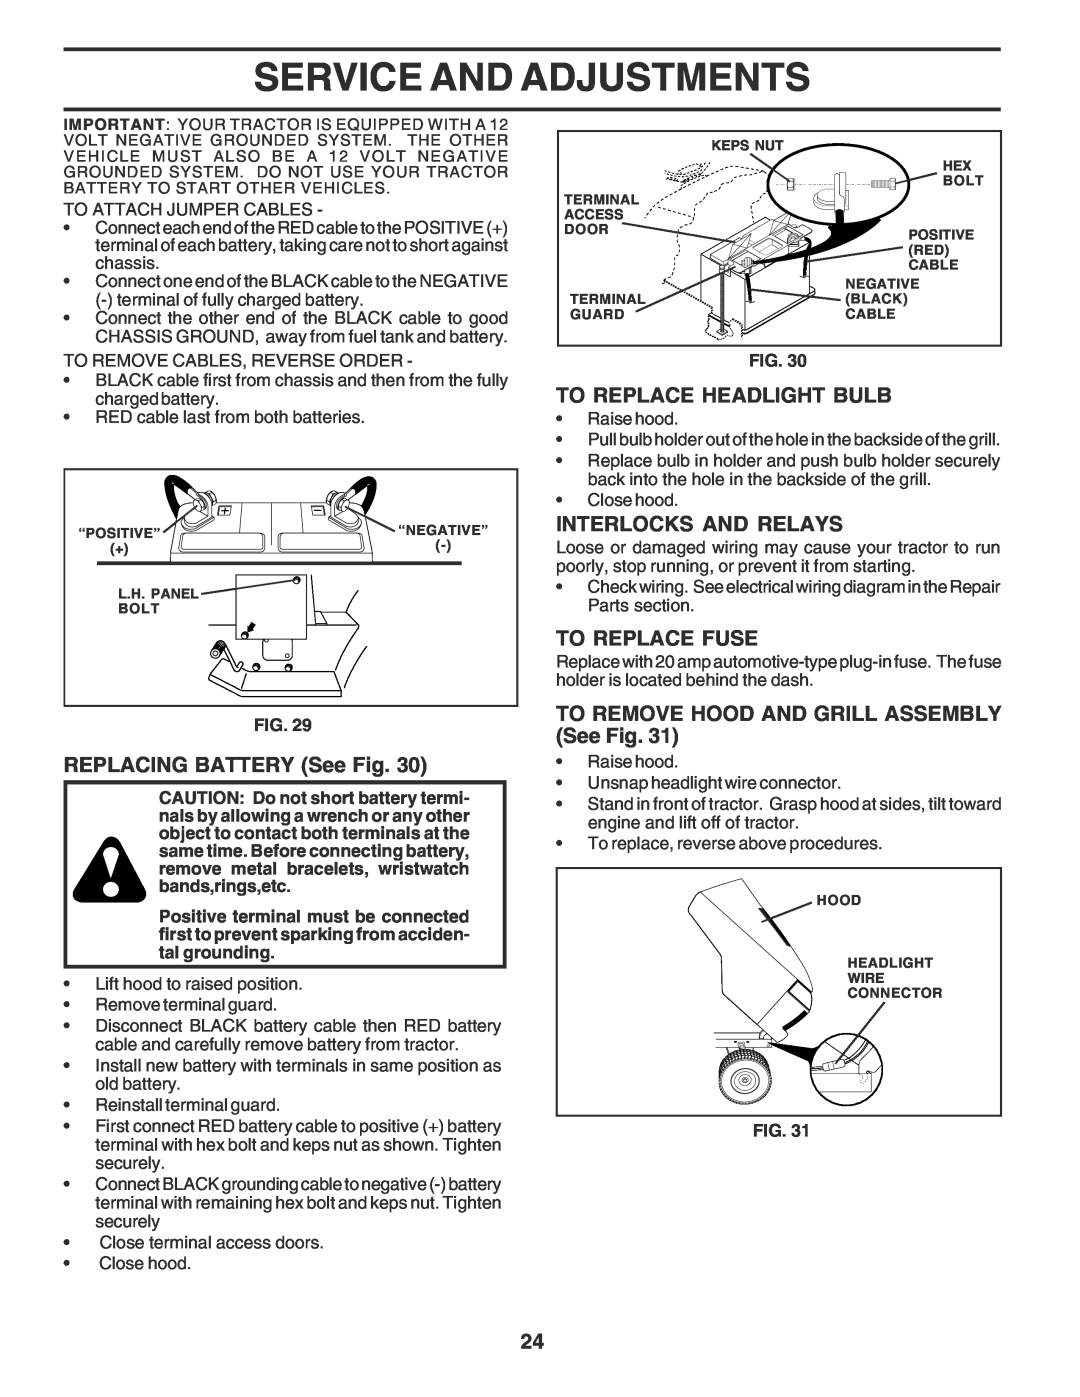 Poulan 183050 owner manual REPLACING BATTERY See Fig, To Replace Headlight Bulb, Interlocks And Relays, To Replace Fuse 